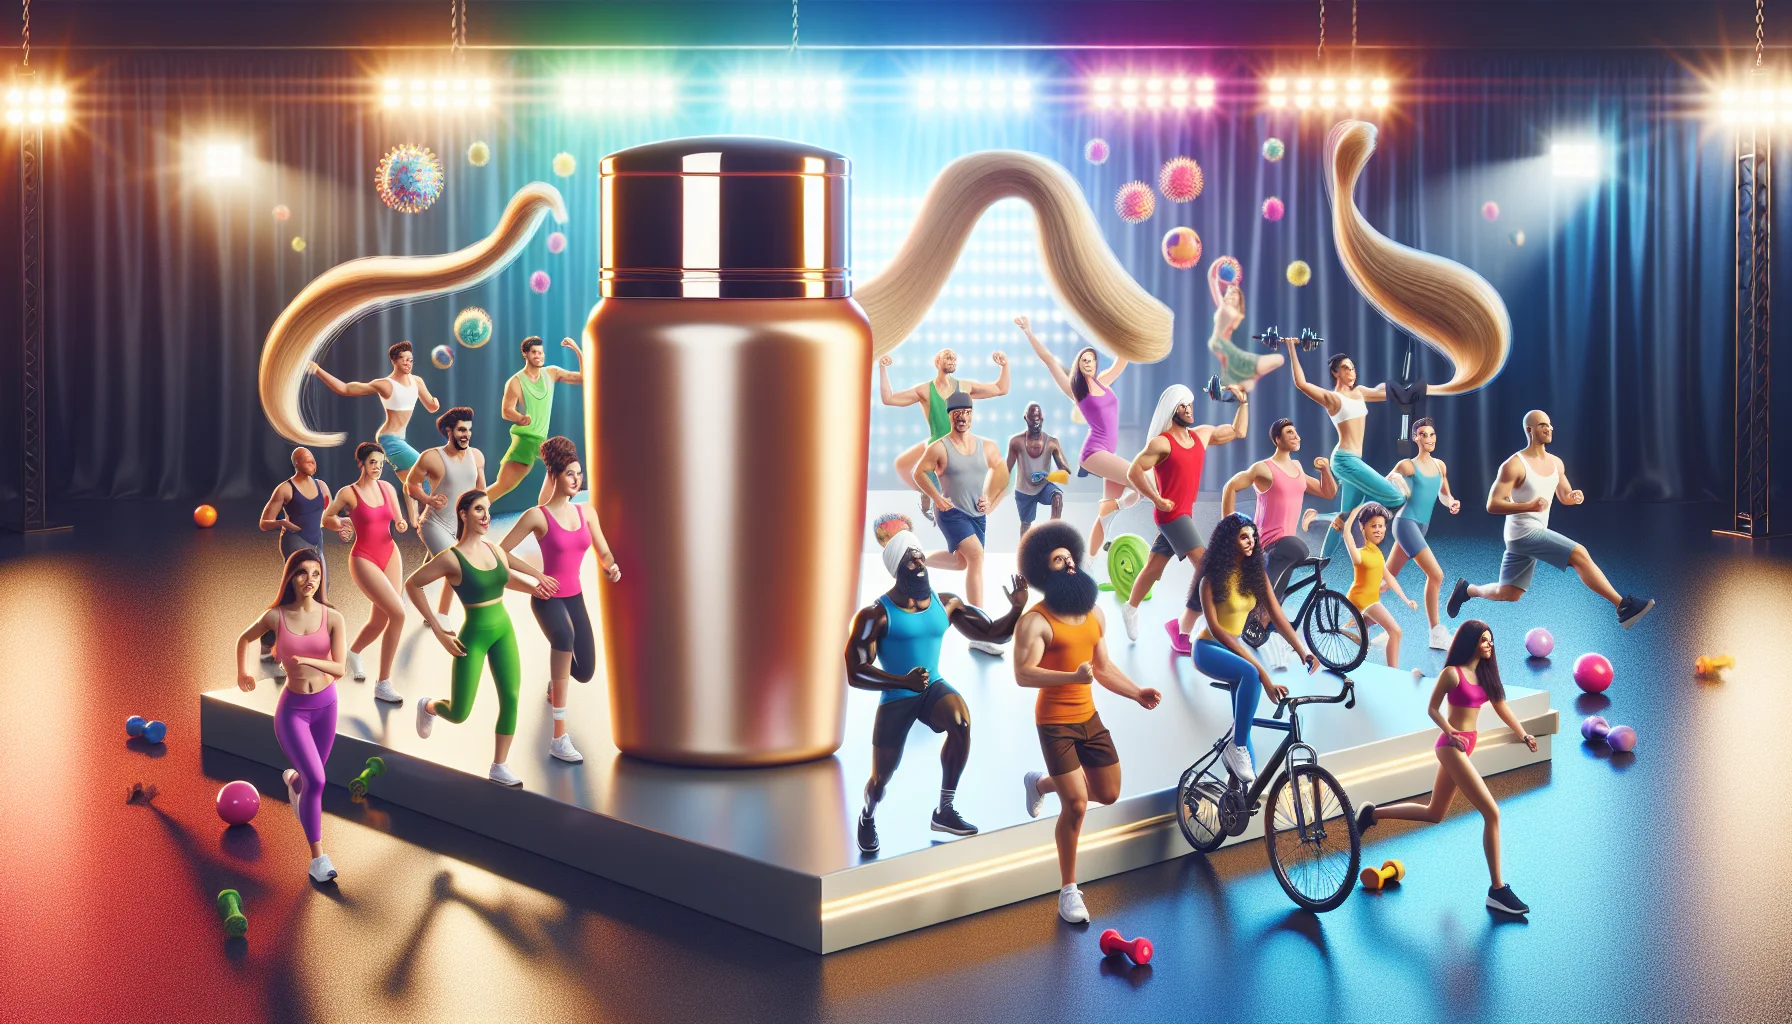 Generate a humorous and attention-grabbing image where fitness and beauty cross paths. The scene is set in a brightly lit gym, vibrant with lively colors. Several people of diverse descents such as Caucasian, Black, Hispanic, Middle-Eastern, South Asian, are engaging in various fun exercises such as cycling, lifting weights, doing yoga. Amid them, there is a focus on an artificial hair product on a pedestal with an illuminated spotlight. The product bottle is sleek, shiny and has the words 'For Hair Care' written on it. The imagery blends elements of physical fitness and hair care in a playful and enticing way.